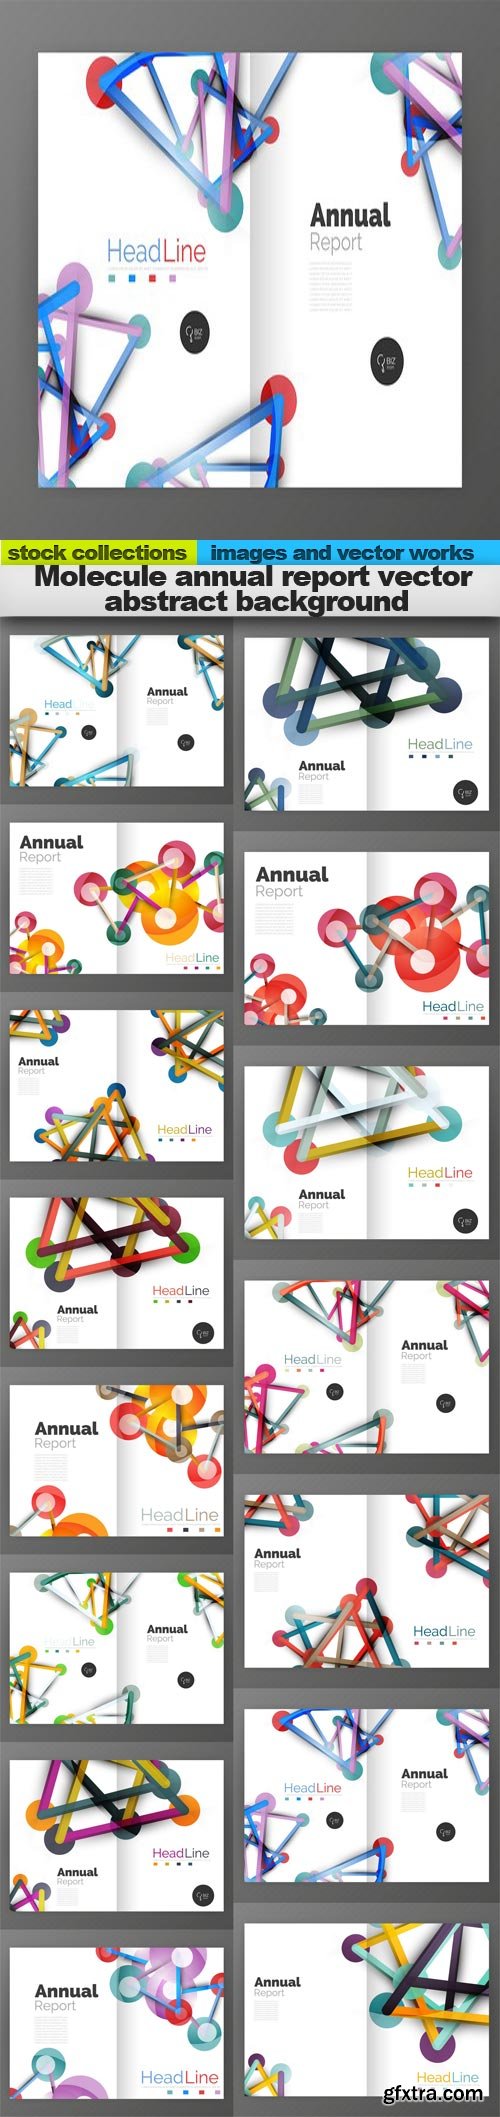 Molecule annual report vector abstract background, 15 x EPS